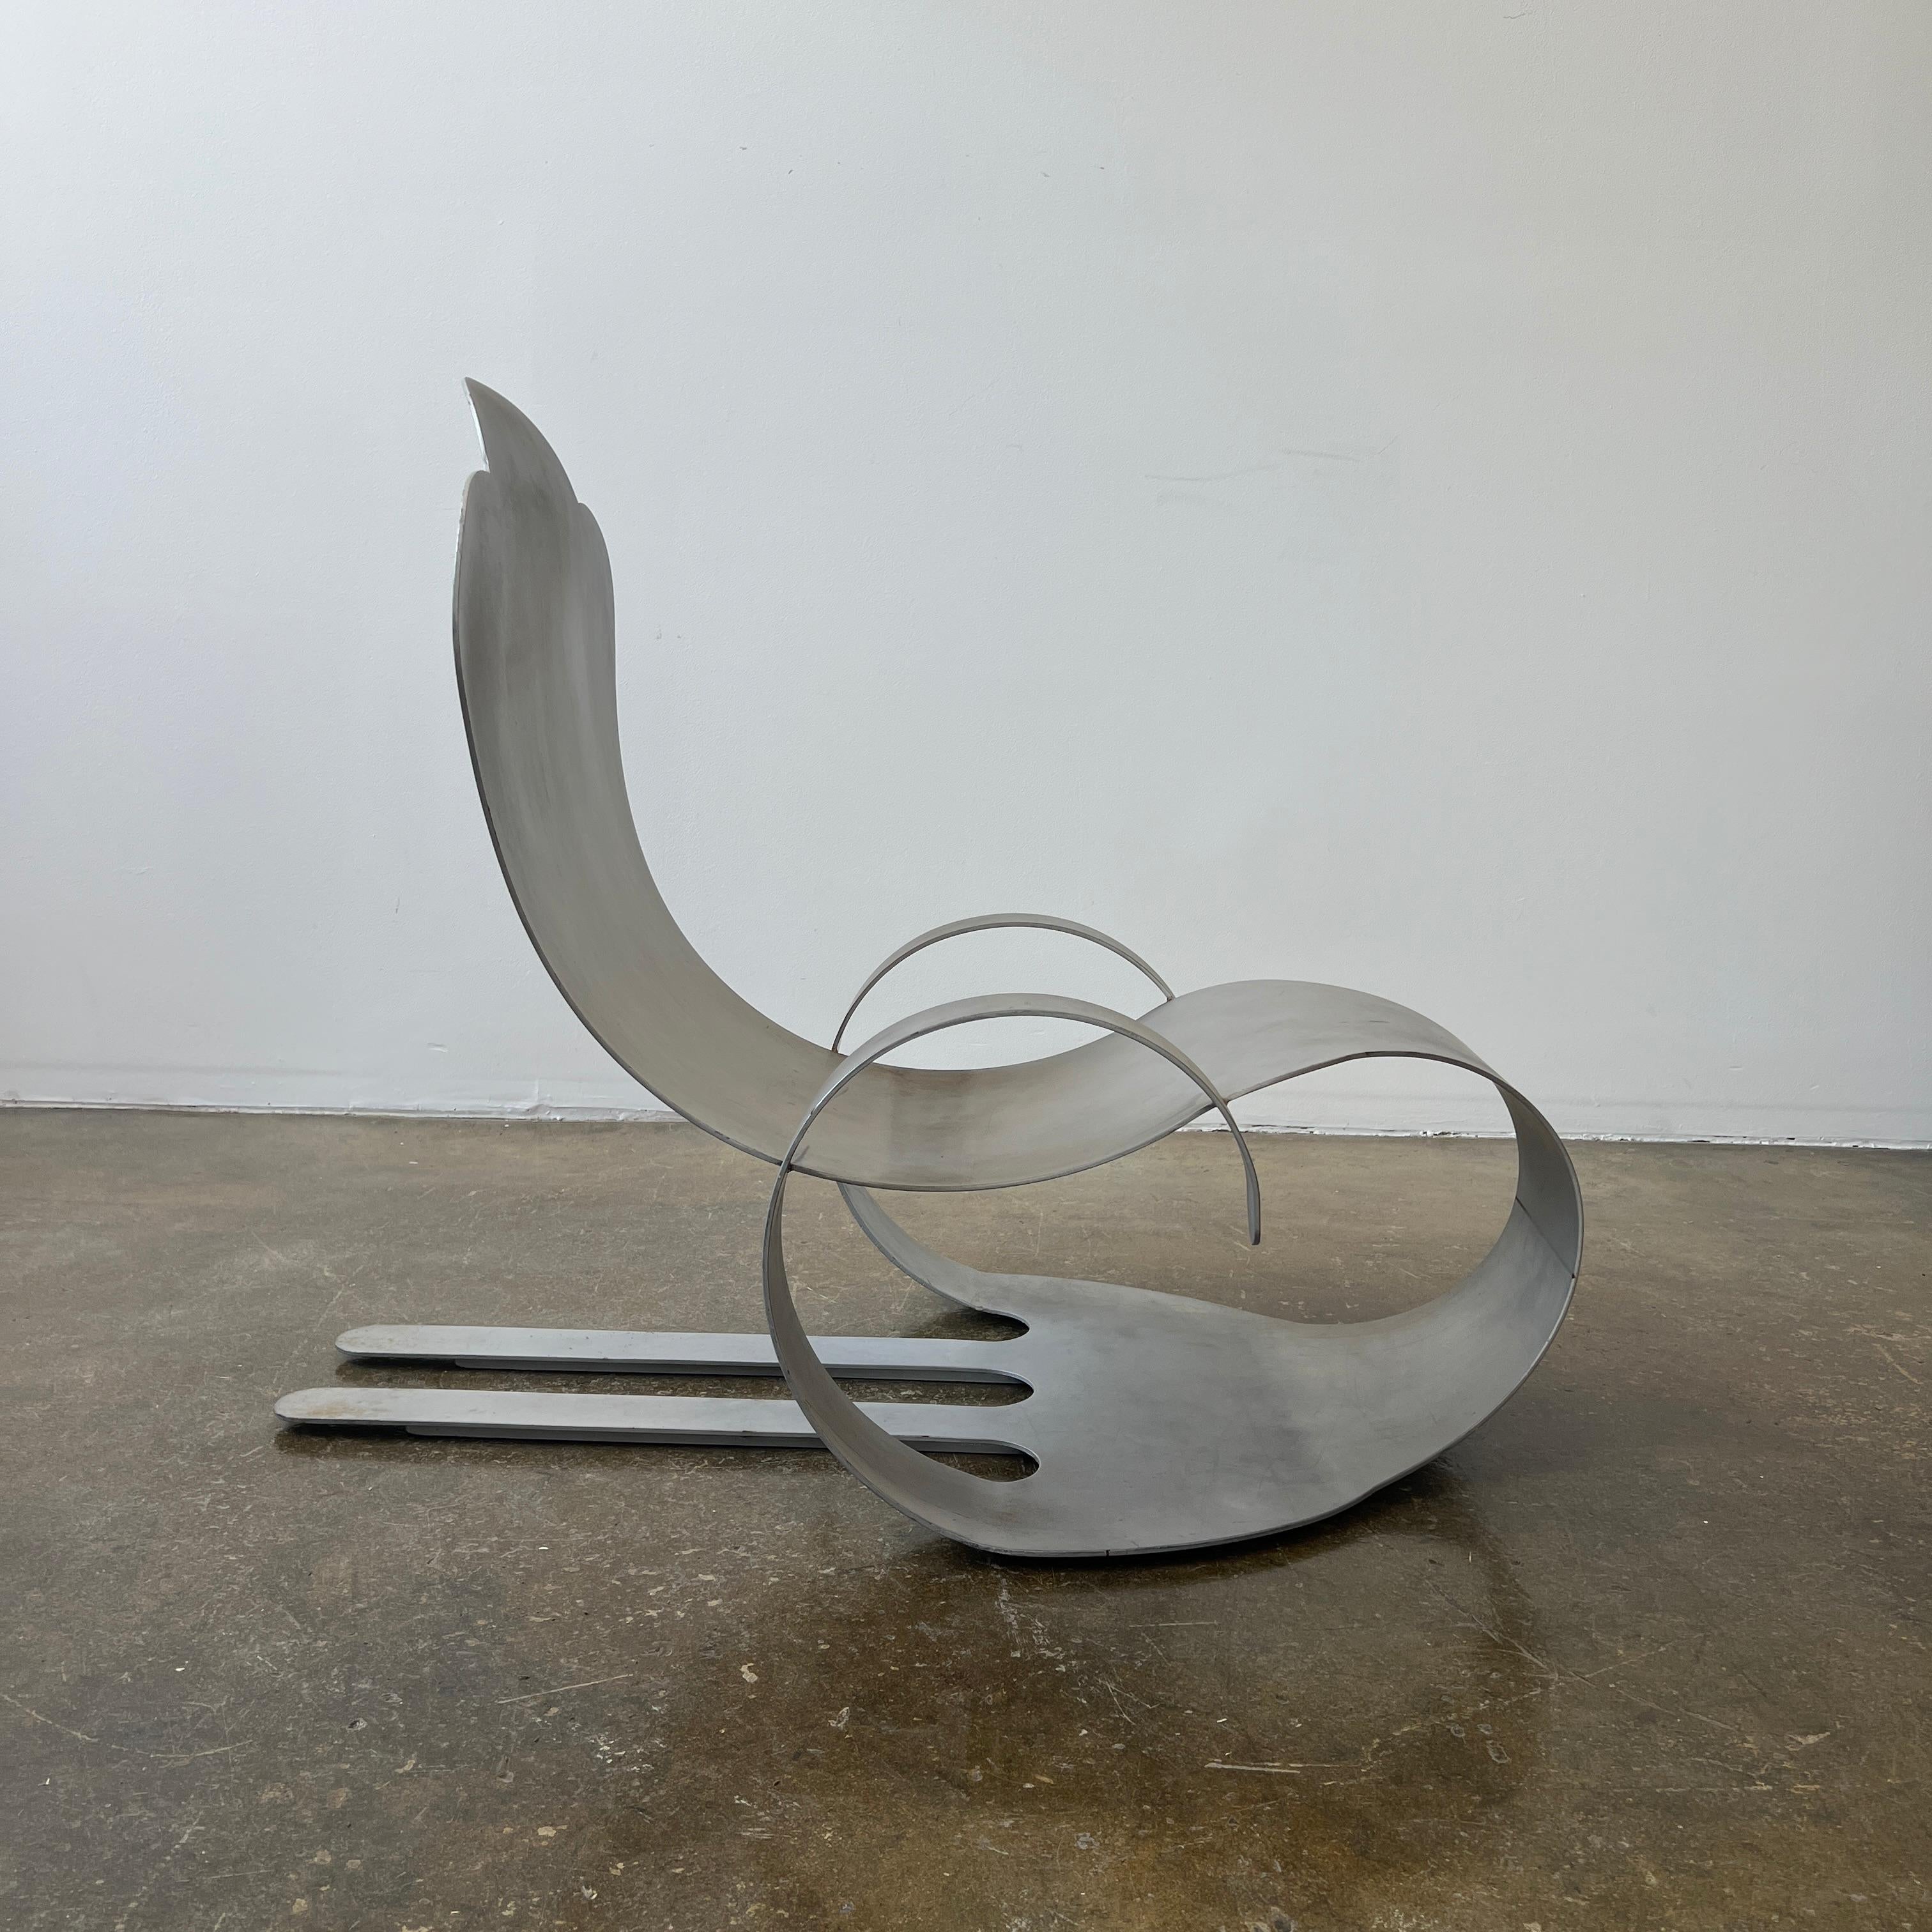 Giant fork pop art chair - a true conversation piece. It's whimsical & functional. A win-win. Add it to your collection.